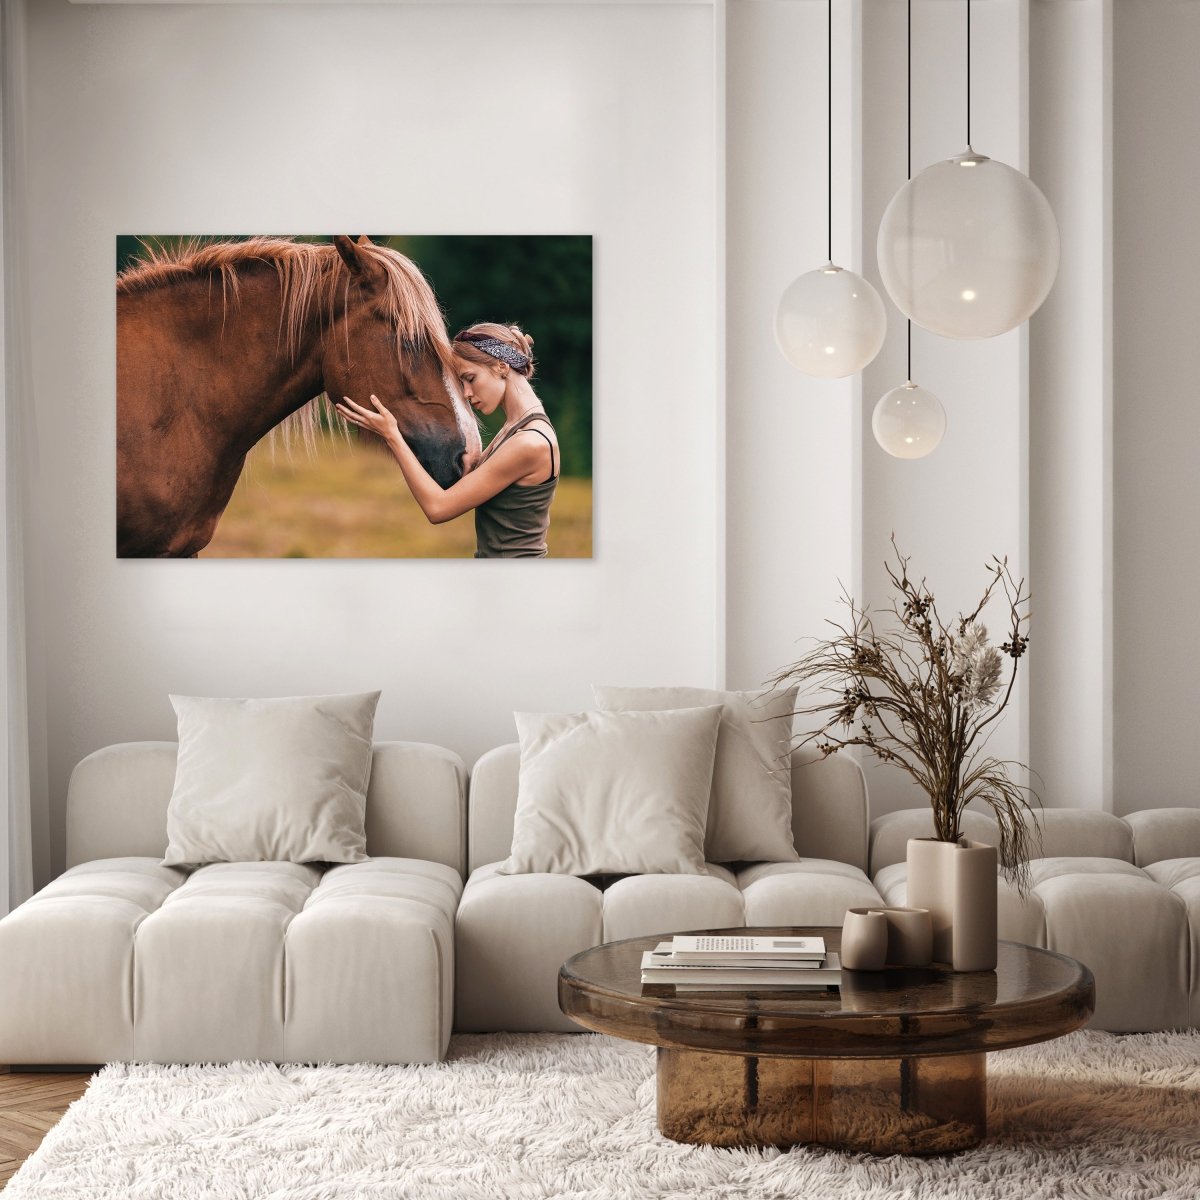 Your favorite pet moment on canvas